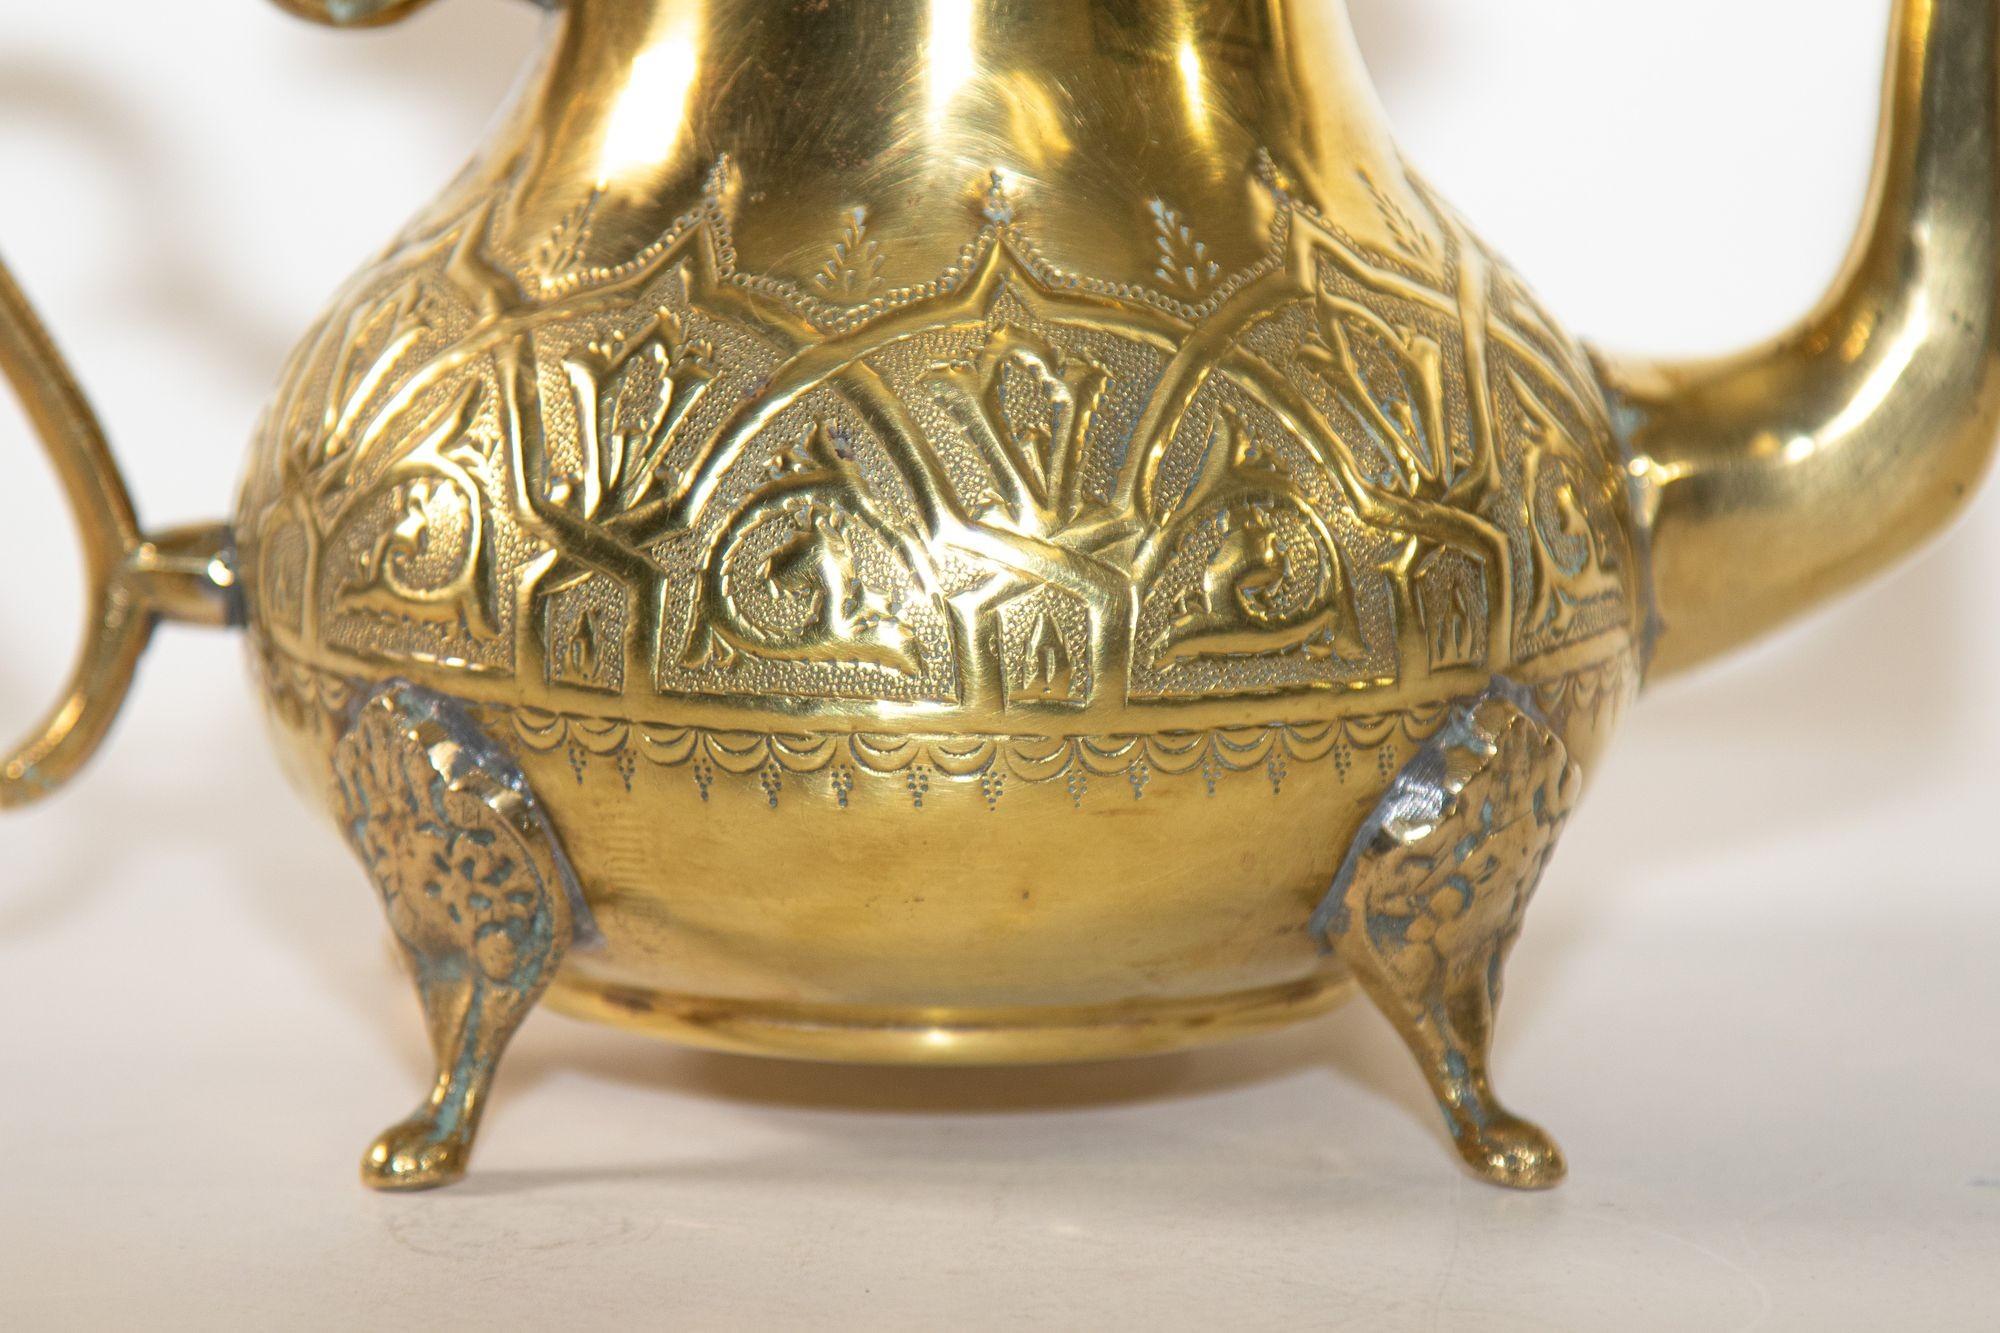 Vintage Moroccan Brass Kettle Tea Pot.
Traditional handmade Moroccan vintage tea pot.
A Moroccan tea pot hand-made by craftsmen from the city of Fez, known as the best craftsman in the world.
Add a traditional Moroccan touch to your kitchen with